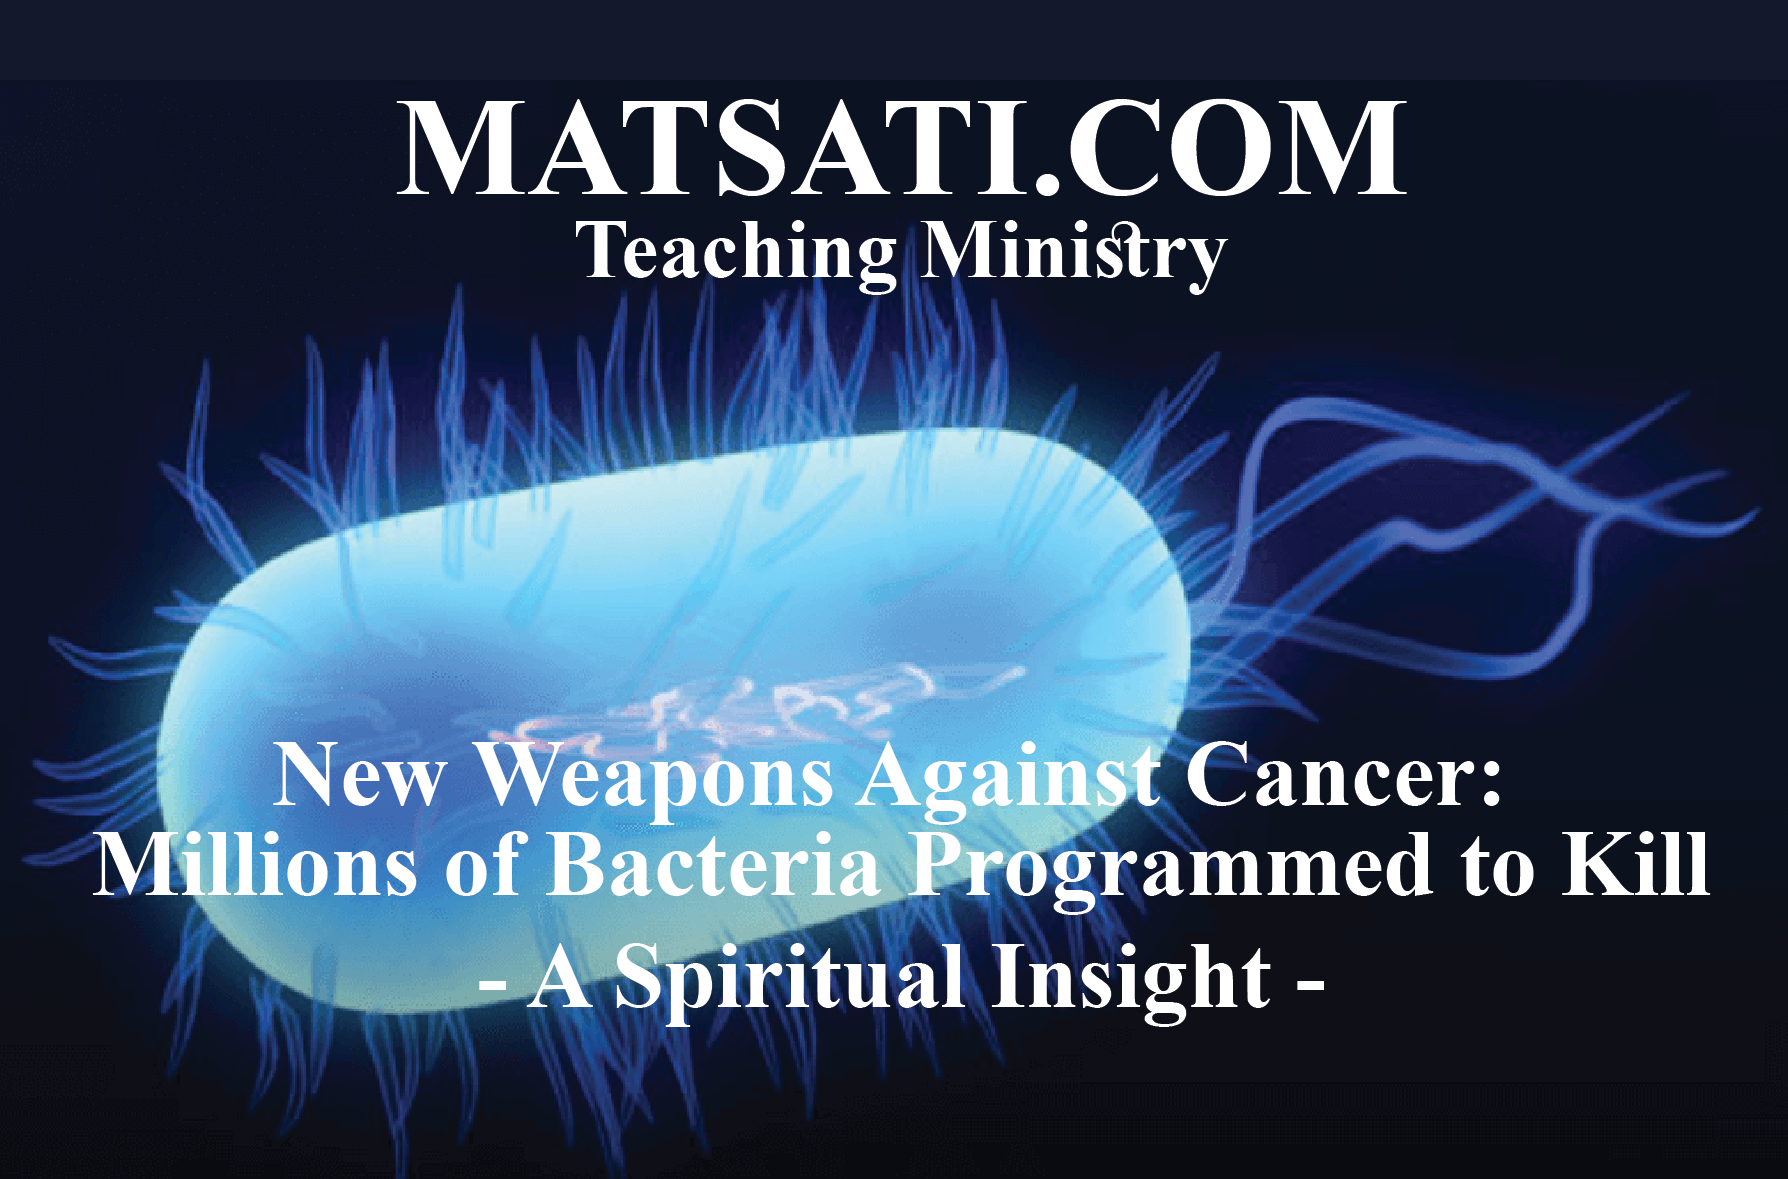 New Weapons Against Cancer: Millions of Bacteria Programmed to Kill - A Spiritual Insight - MATSATI.COM Teaching Ministry